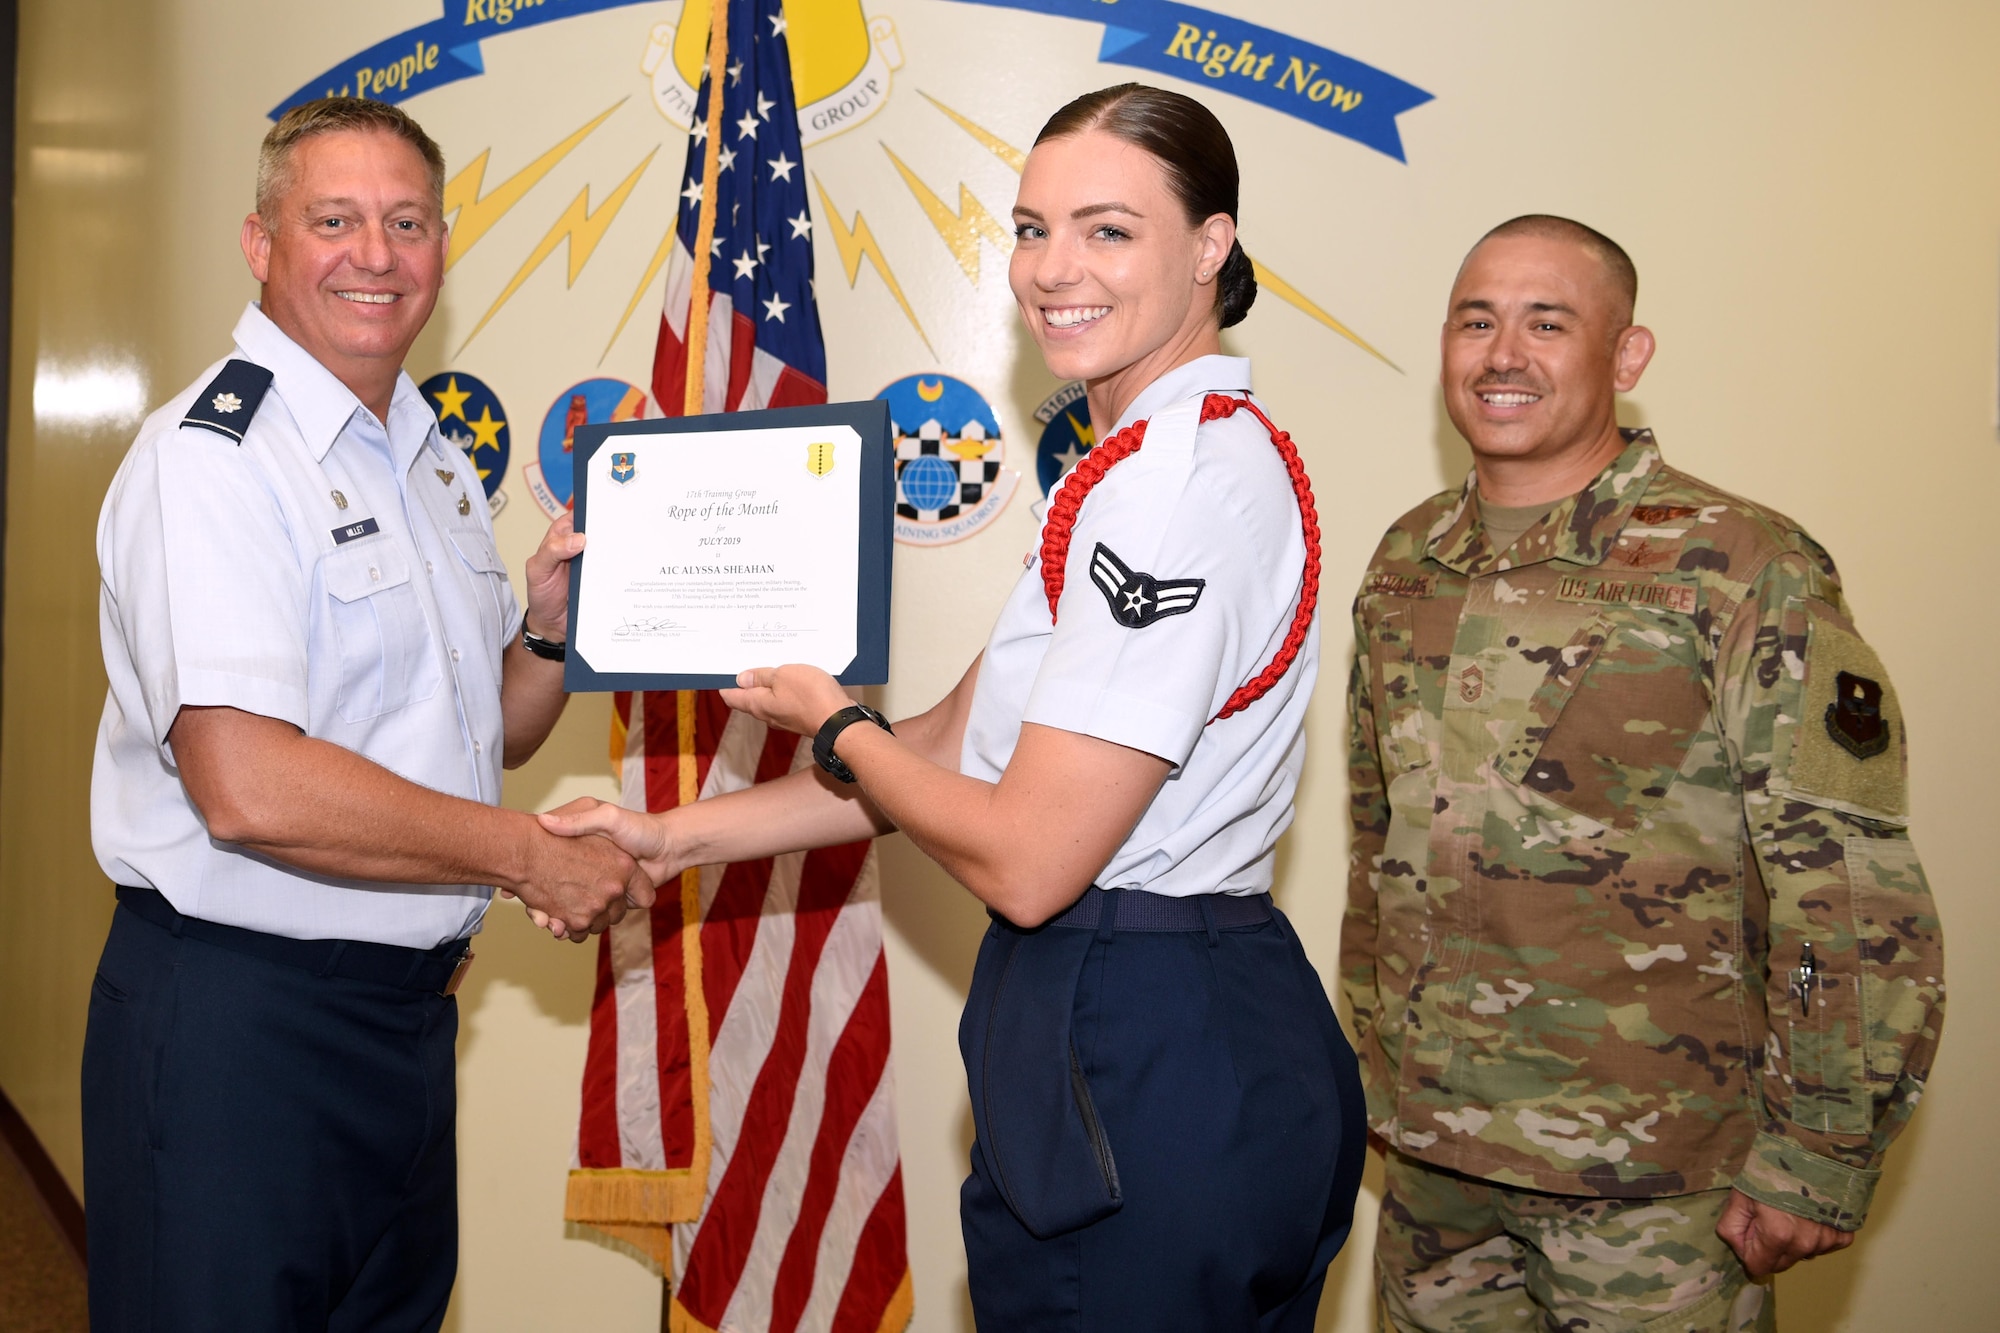 U.S. Air Force Lt. Col. Herbert Millet III, 313th Training Squadron commander, presents the 312th Training Squadron Student of the Month award to Airman 1st Class Alyssa Sheahan, 312th TRS student, at the Brandenburg Hall on Goodfellow Air Force Base, Texas, August 2, 2019. The 312th TRS’s mission is to provide Department of Defense and international customers with mission ready fire protection and special instruments graduates and provides mission support for the Air Force Technical Applications Center. (U.S. Air Force photo by Airman 1st Class Abbey Rieves/Released)